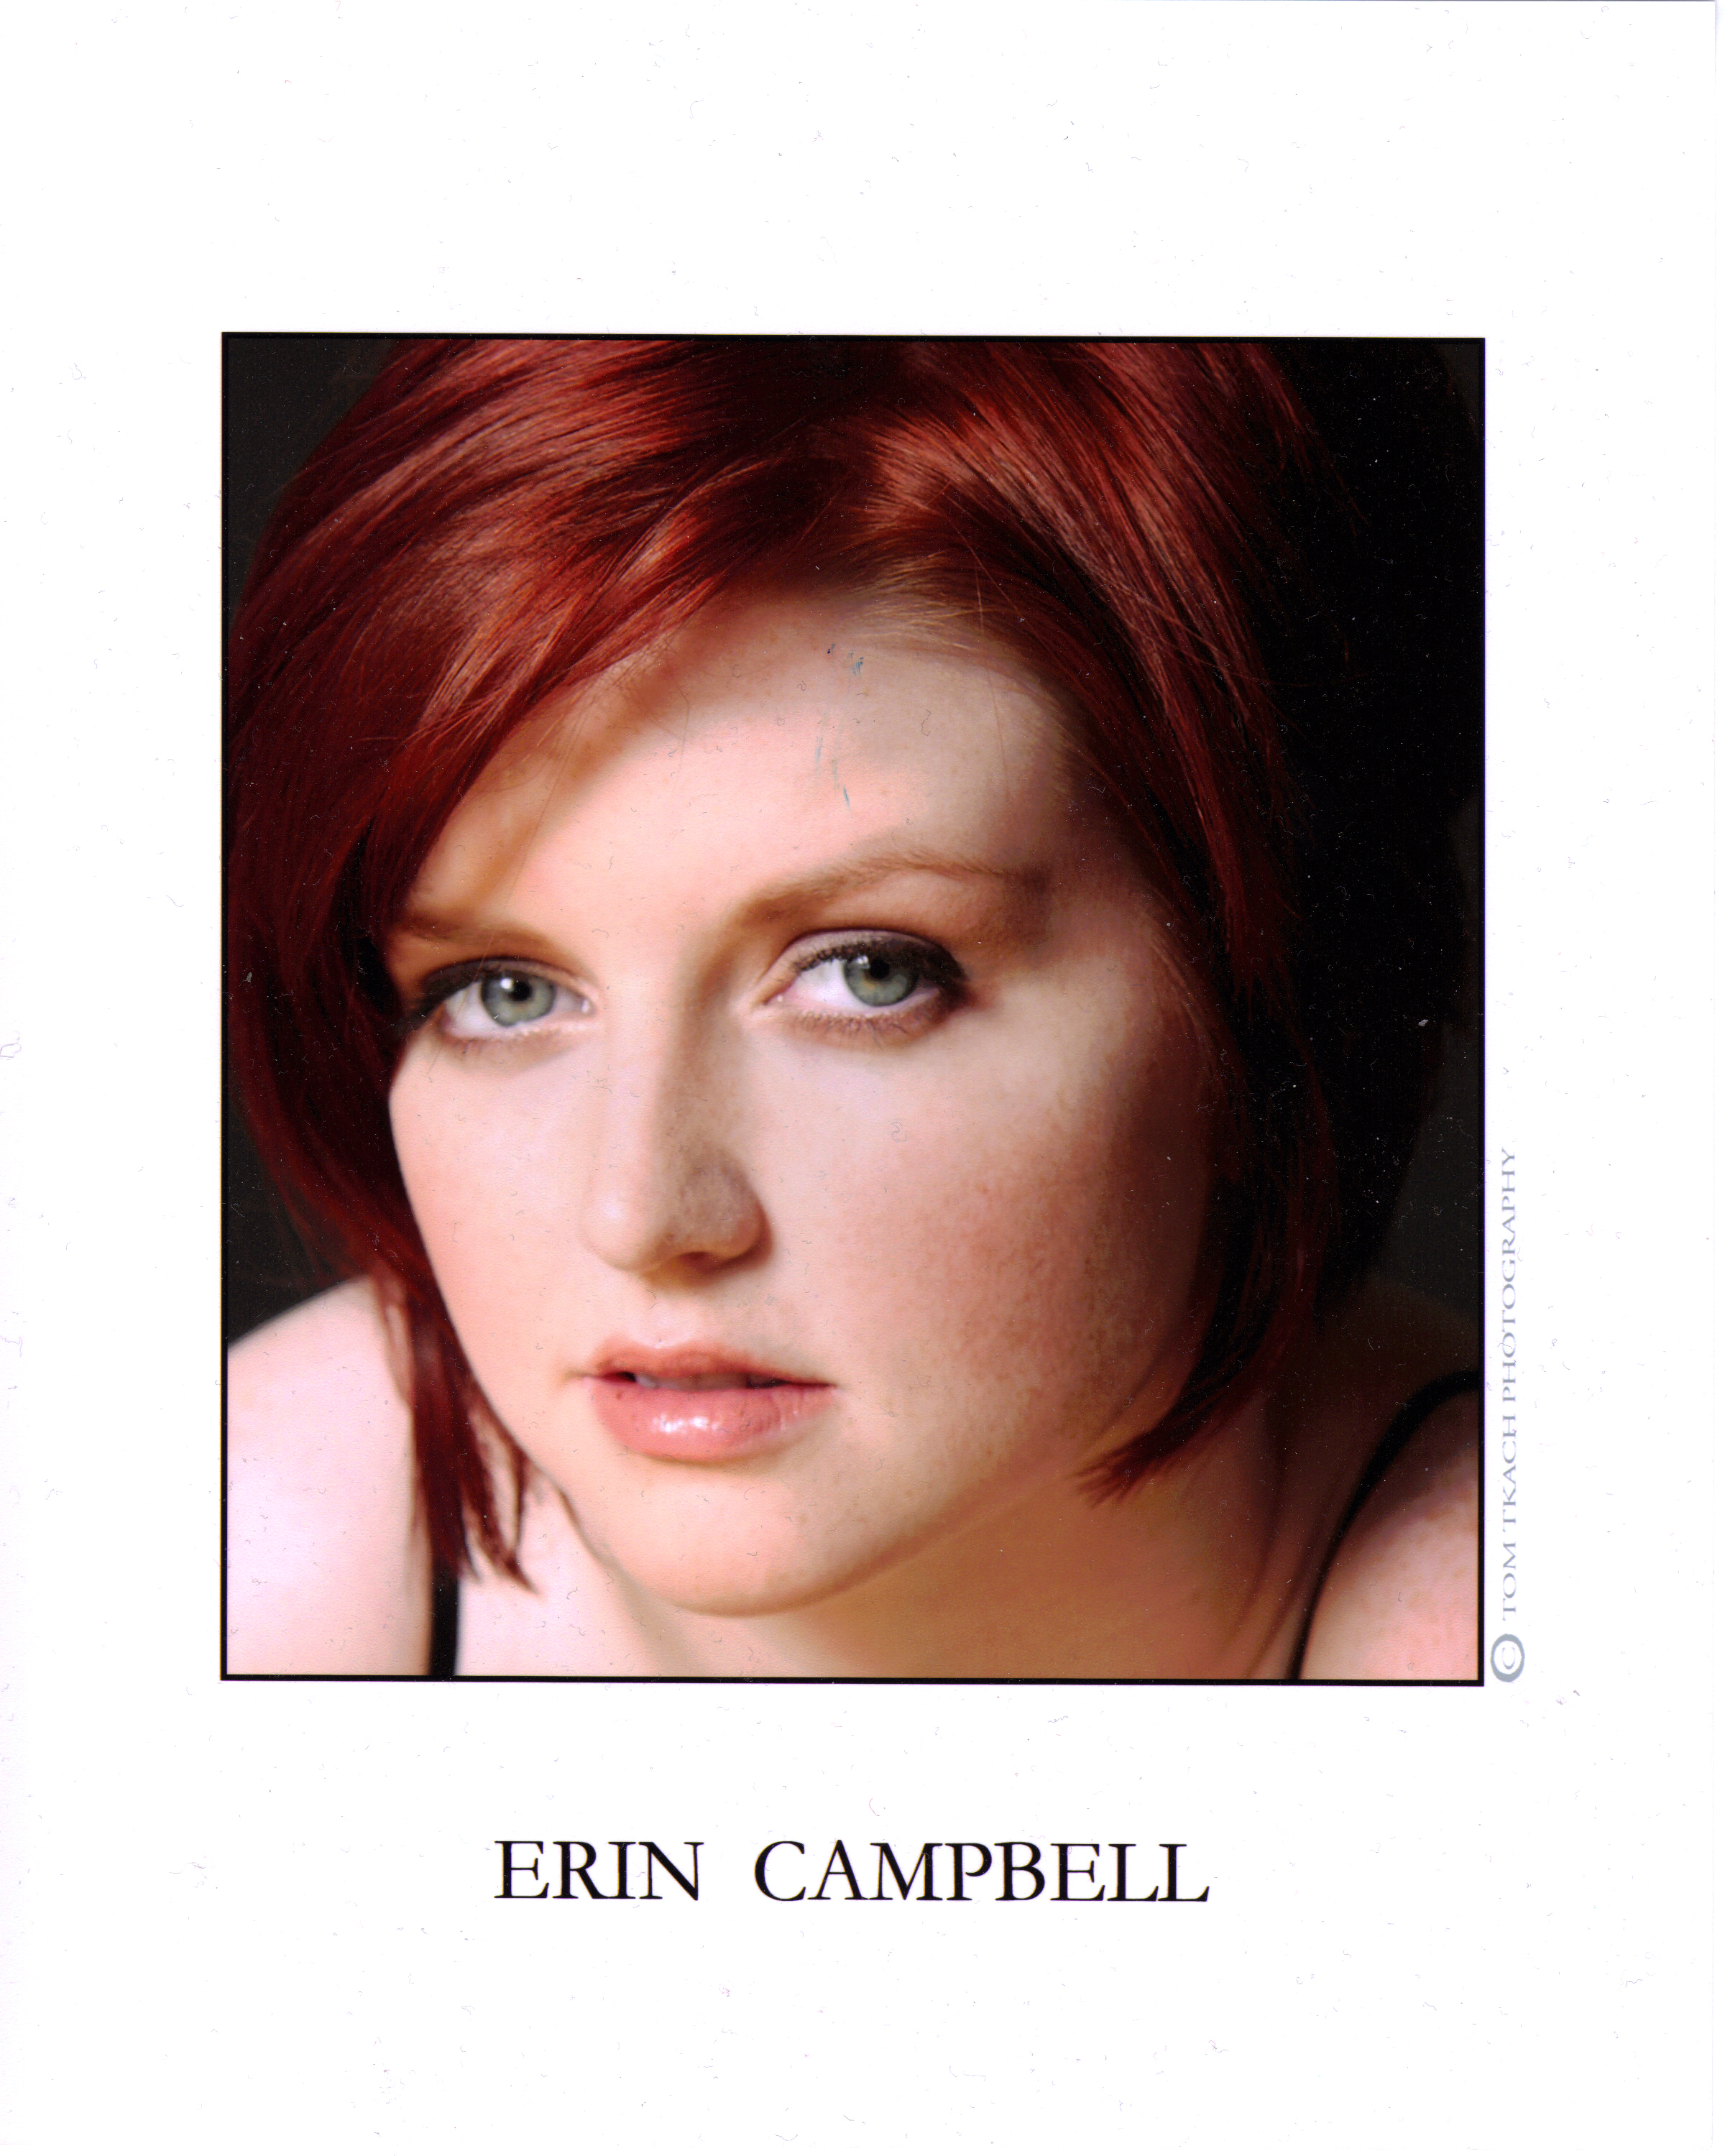 Erin Campbell